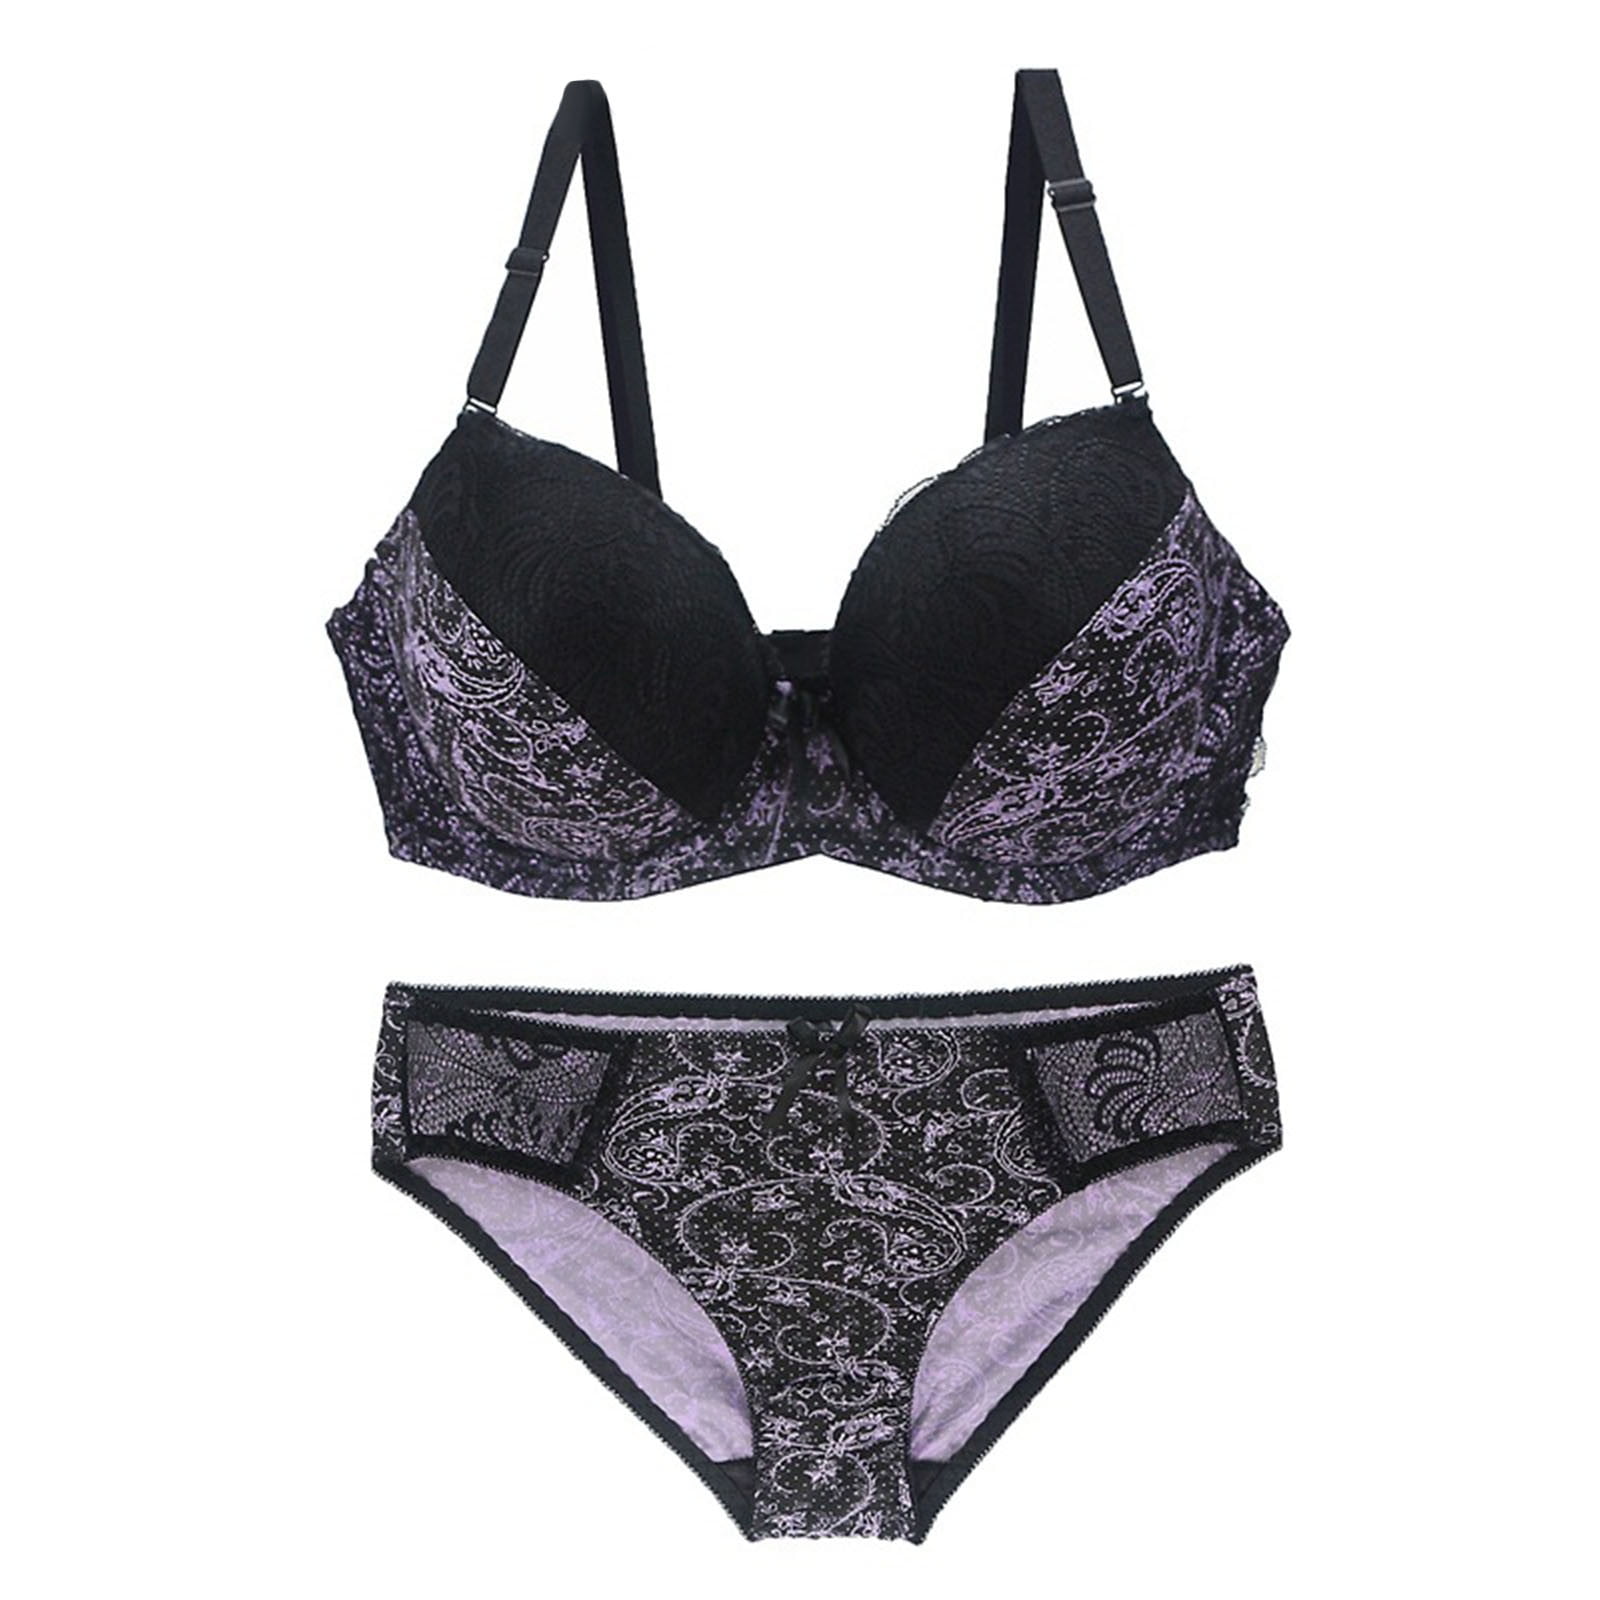 Underwire Lace Front Closure Bra And Panty Set Back Sexy Lingerie For  Women, Intimate Underwear And Sleepwear Q0705 From Sihuai03, $11.73